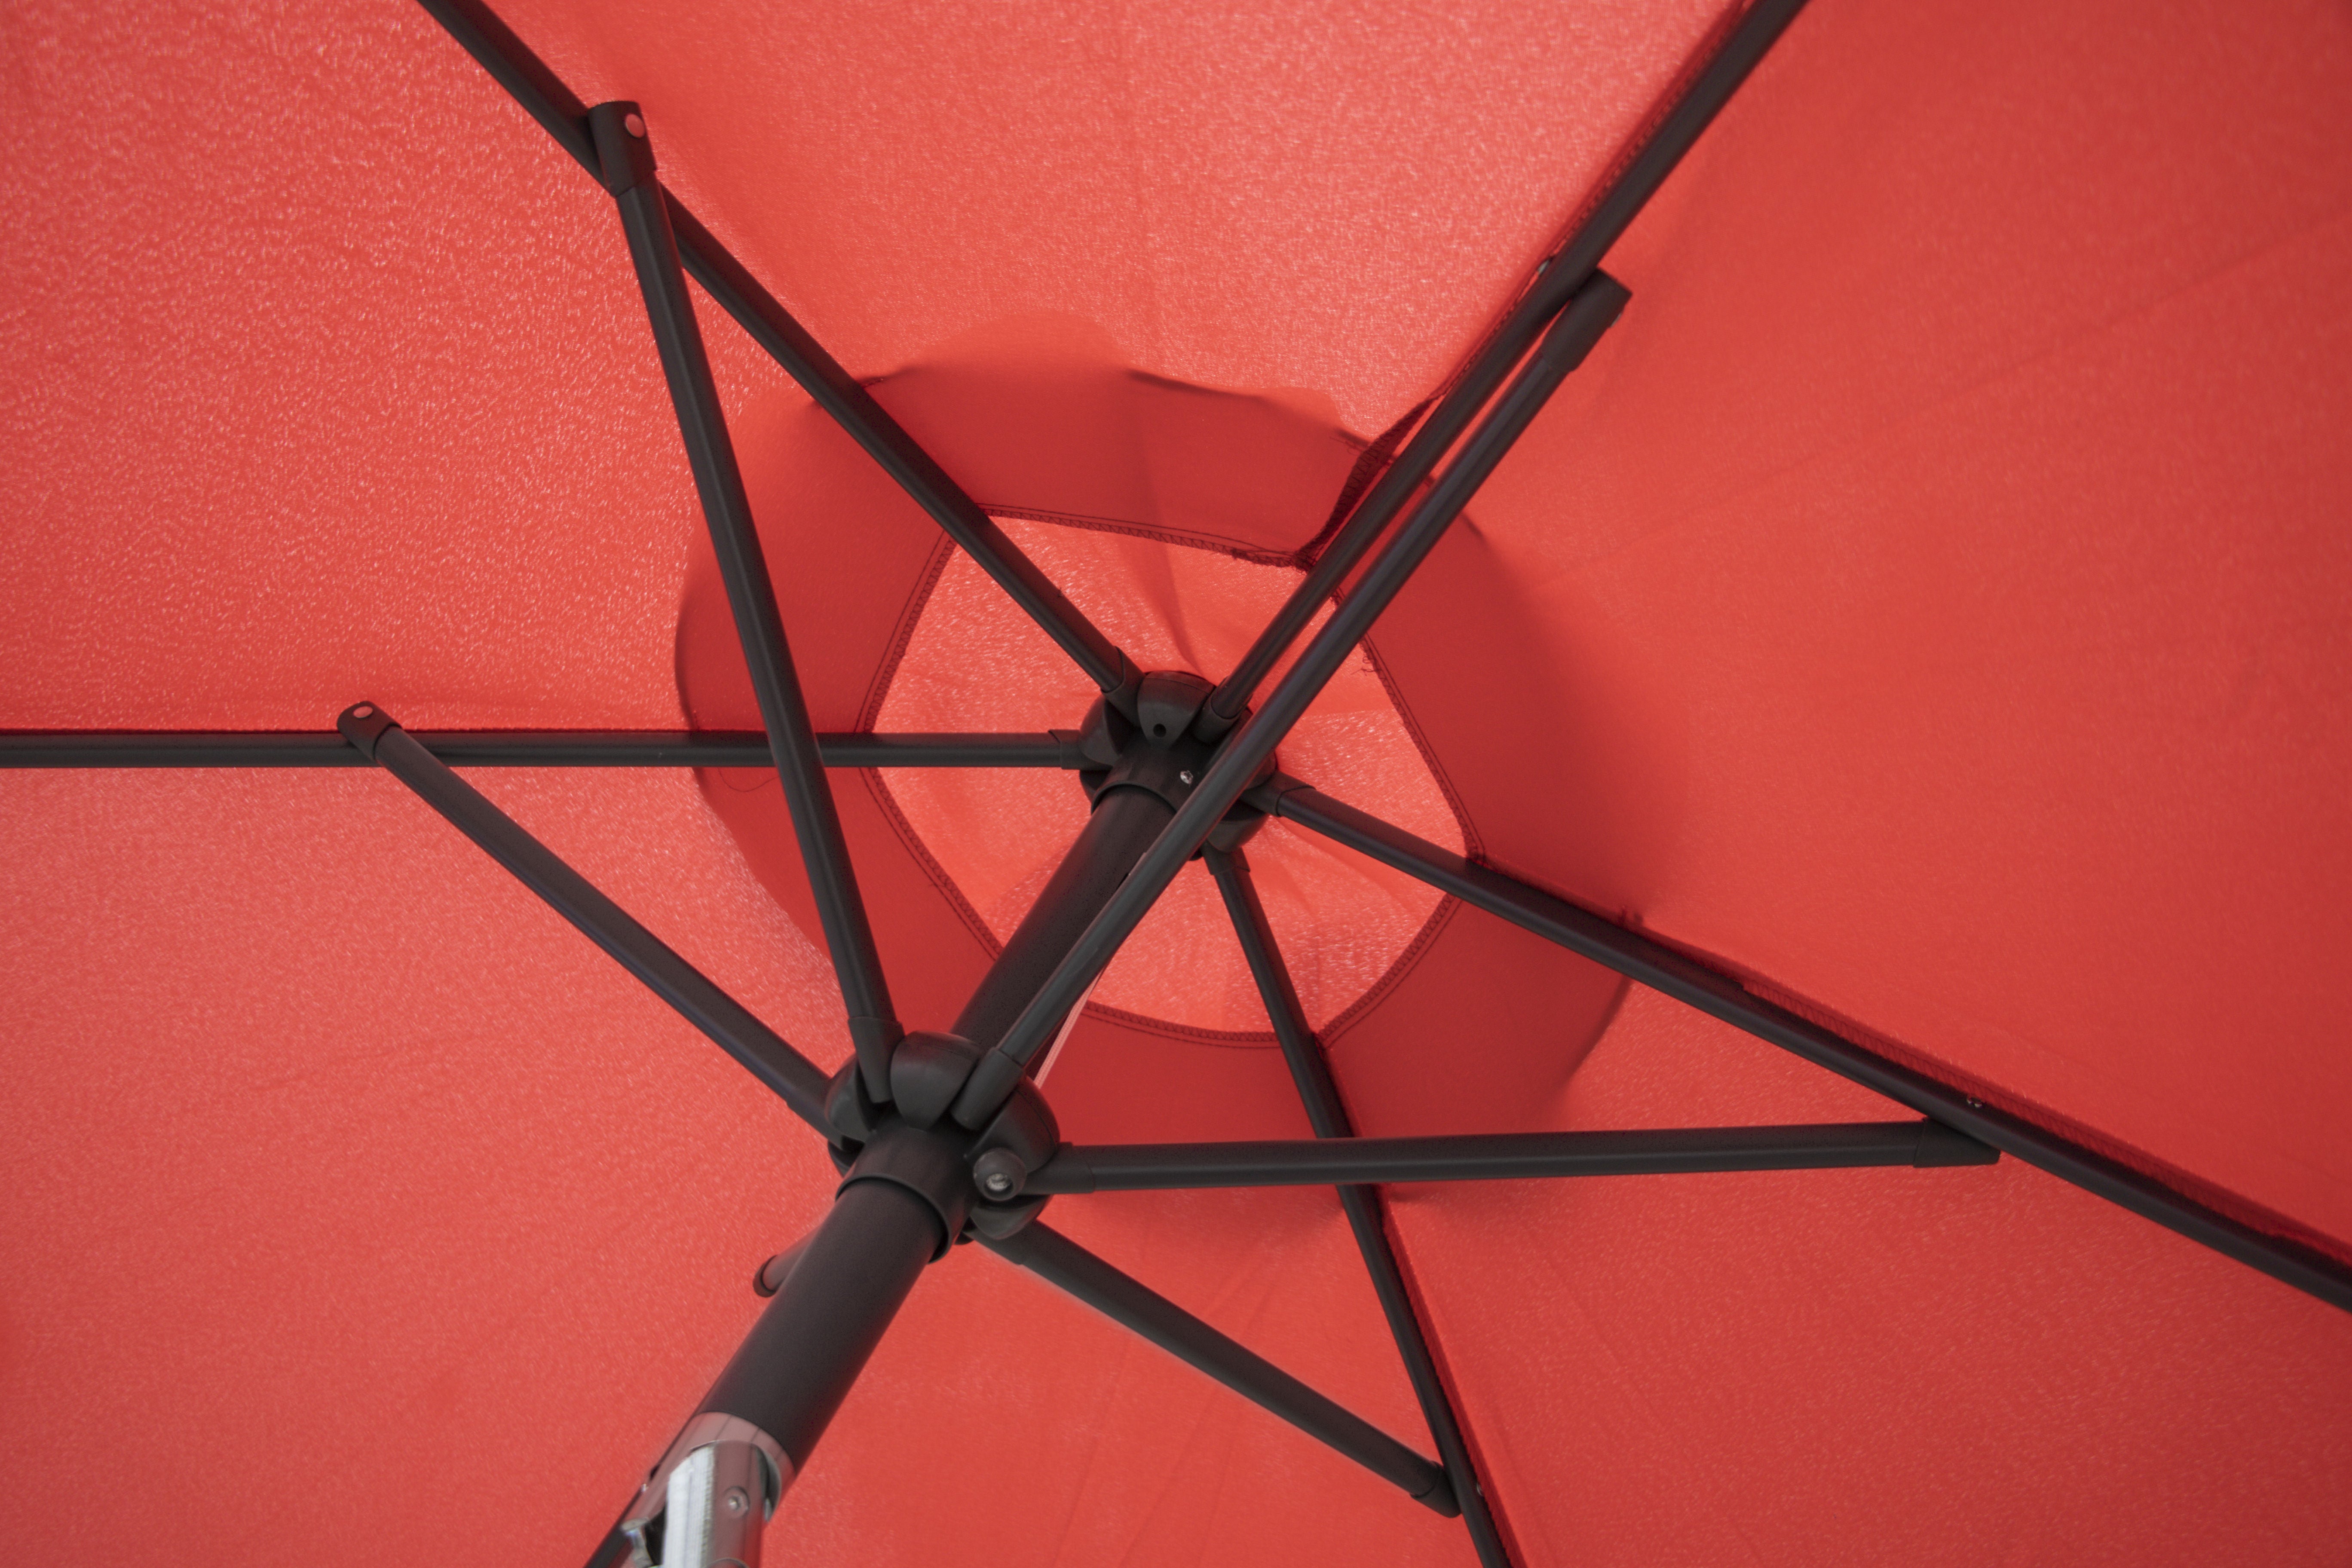 7' Tilting market umbrella, w/out base, cover included RED